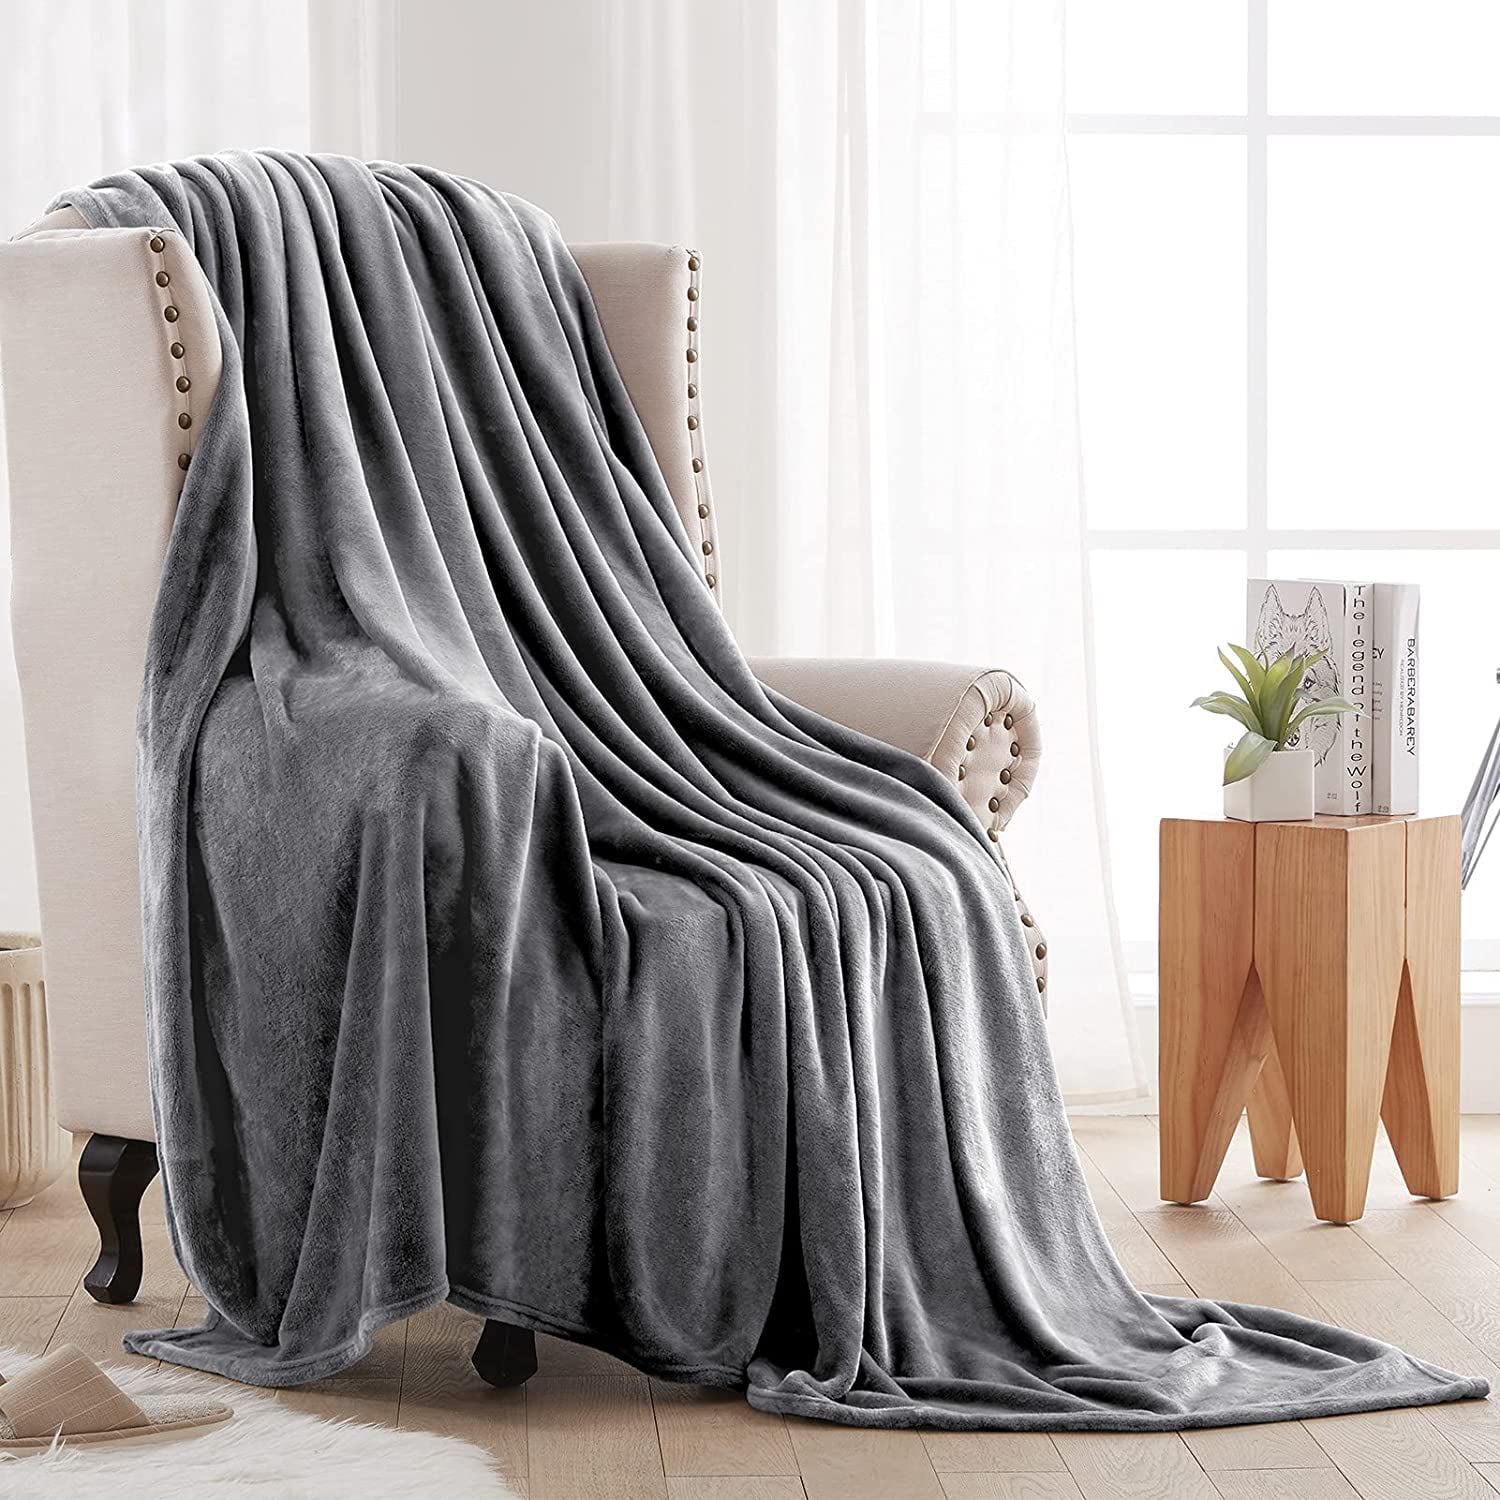 Navy Color 6 Pounds Warm in Autumn and Winter Longhui bedding Grey Blue Sherpa Plush Thick Warm Blanket 80 x 90 Queen Size Super Soft Fuzzy Microfiber Throw Blankets for Couch Sofa Bed